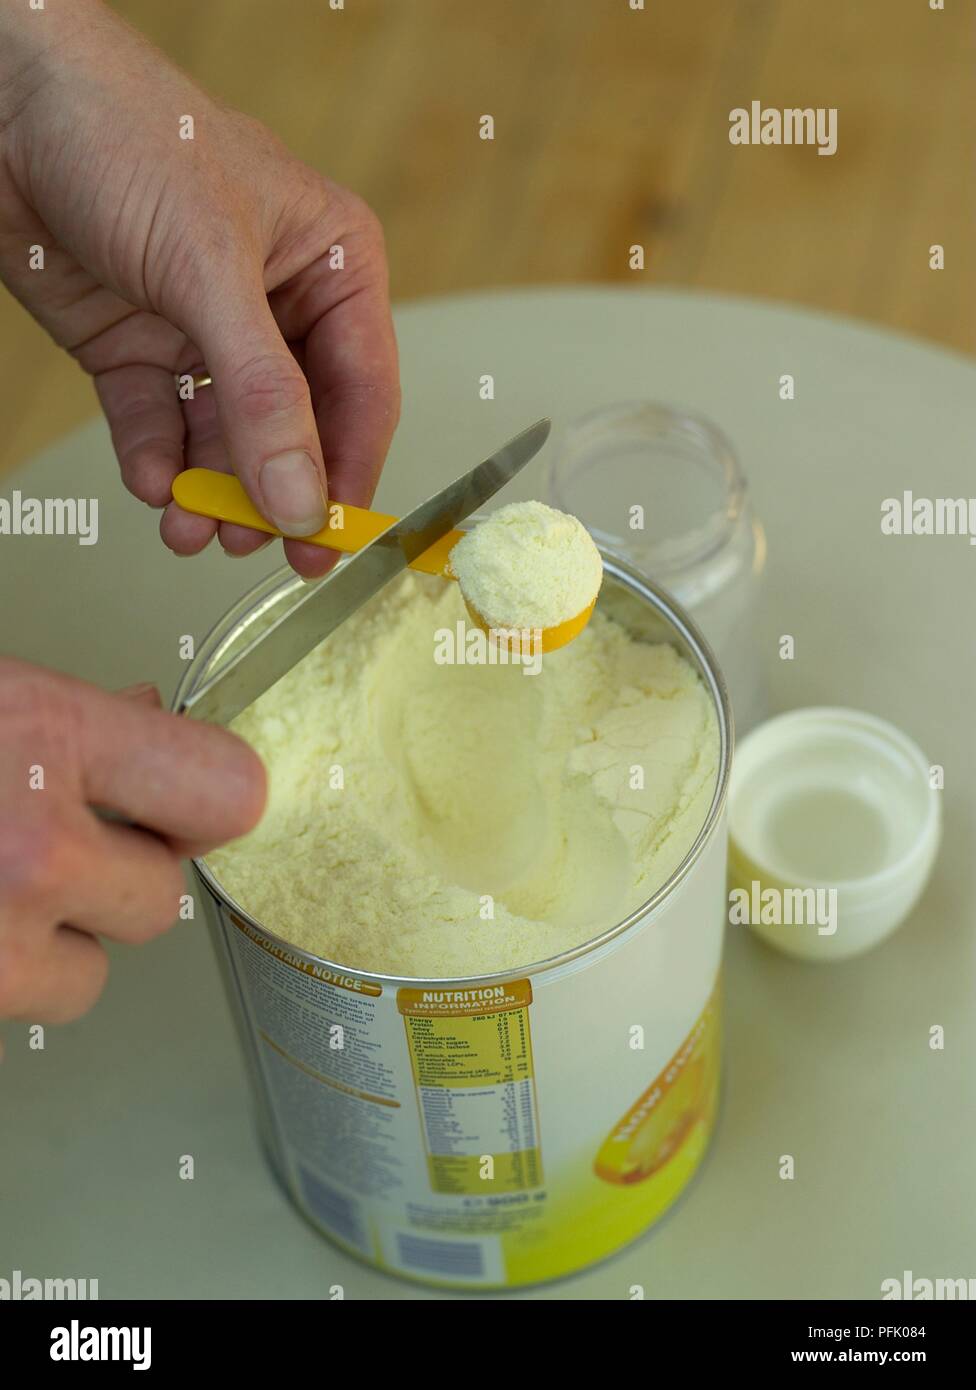 Woman's hands scraping off excess formula from measuring spoon, close-up Stock Photo